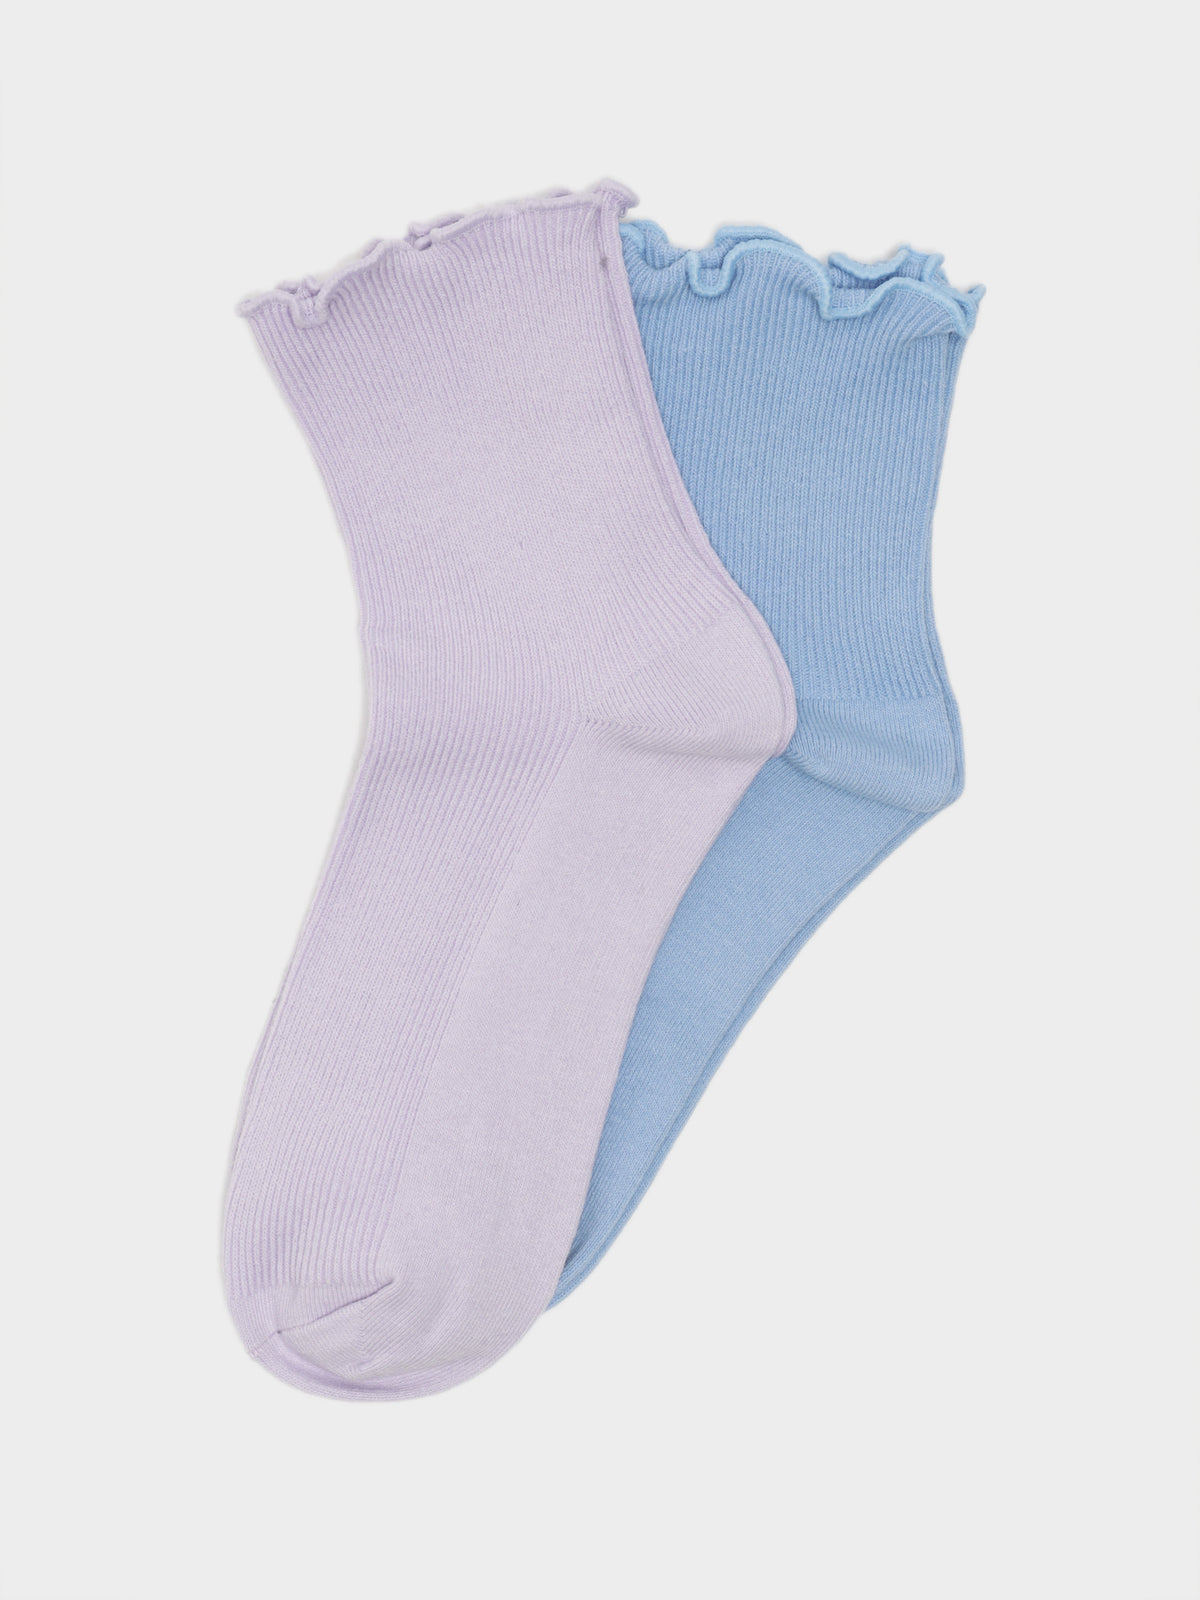 2 Pairs of Ruffle Ankle Socks in Purple &amp; Blue